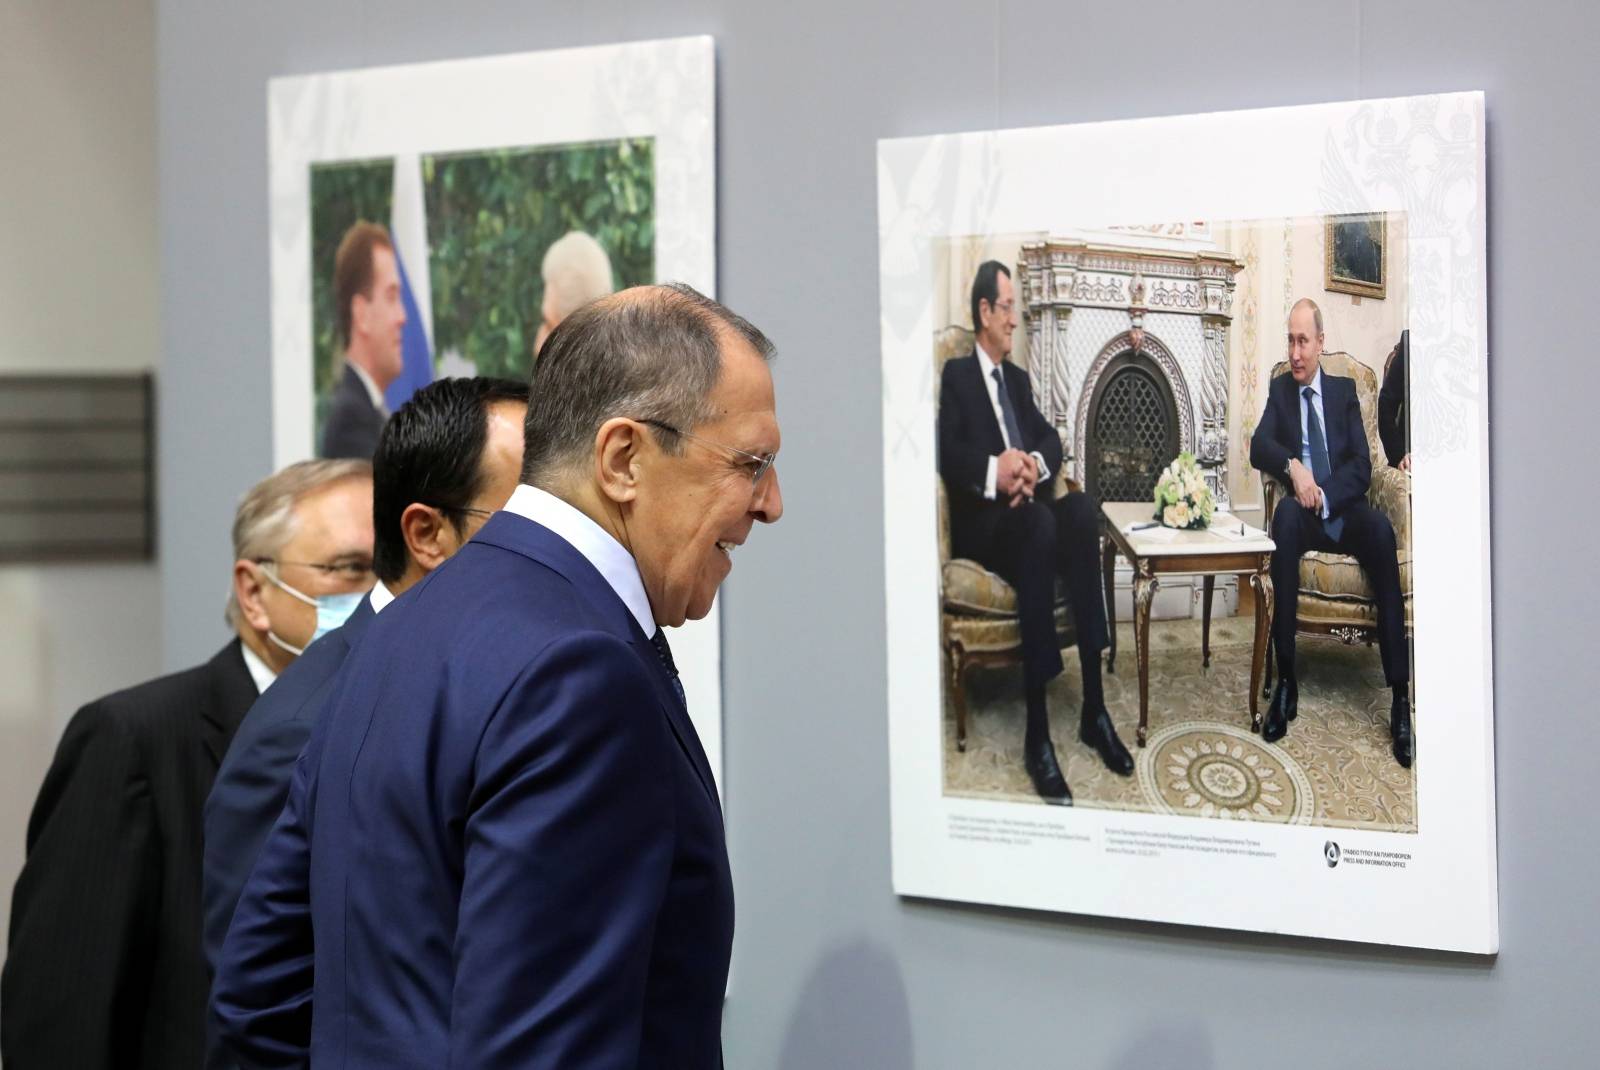 Russia's Lavrov meets Cypriot FM Christodoulides in Nicosia